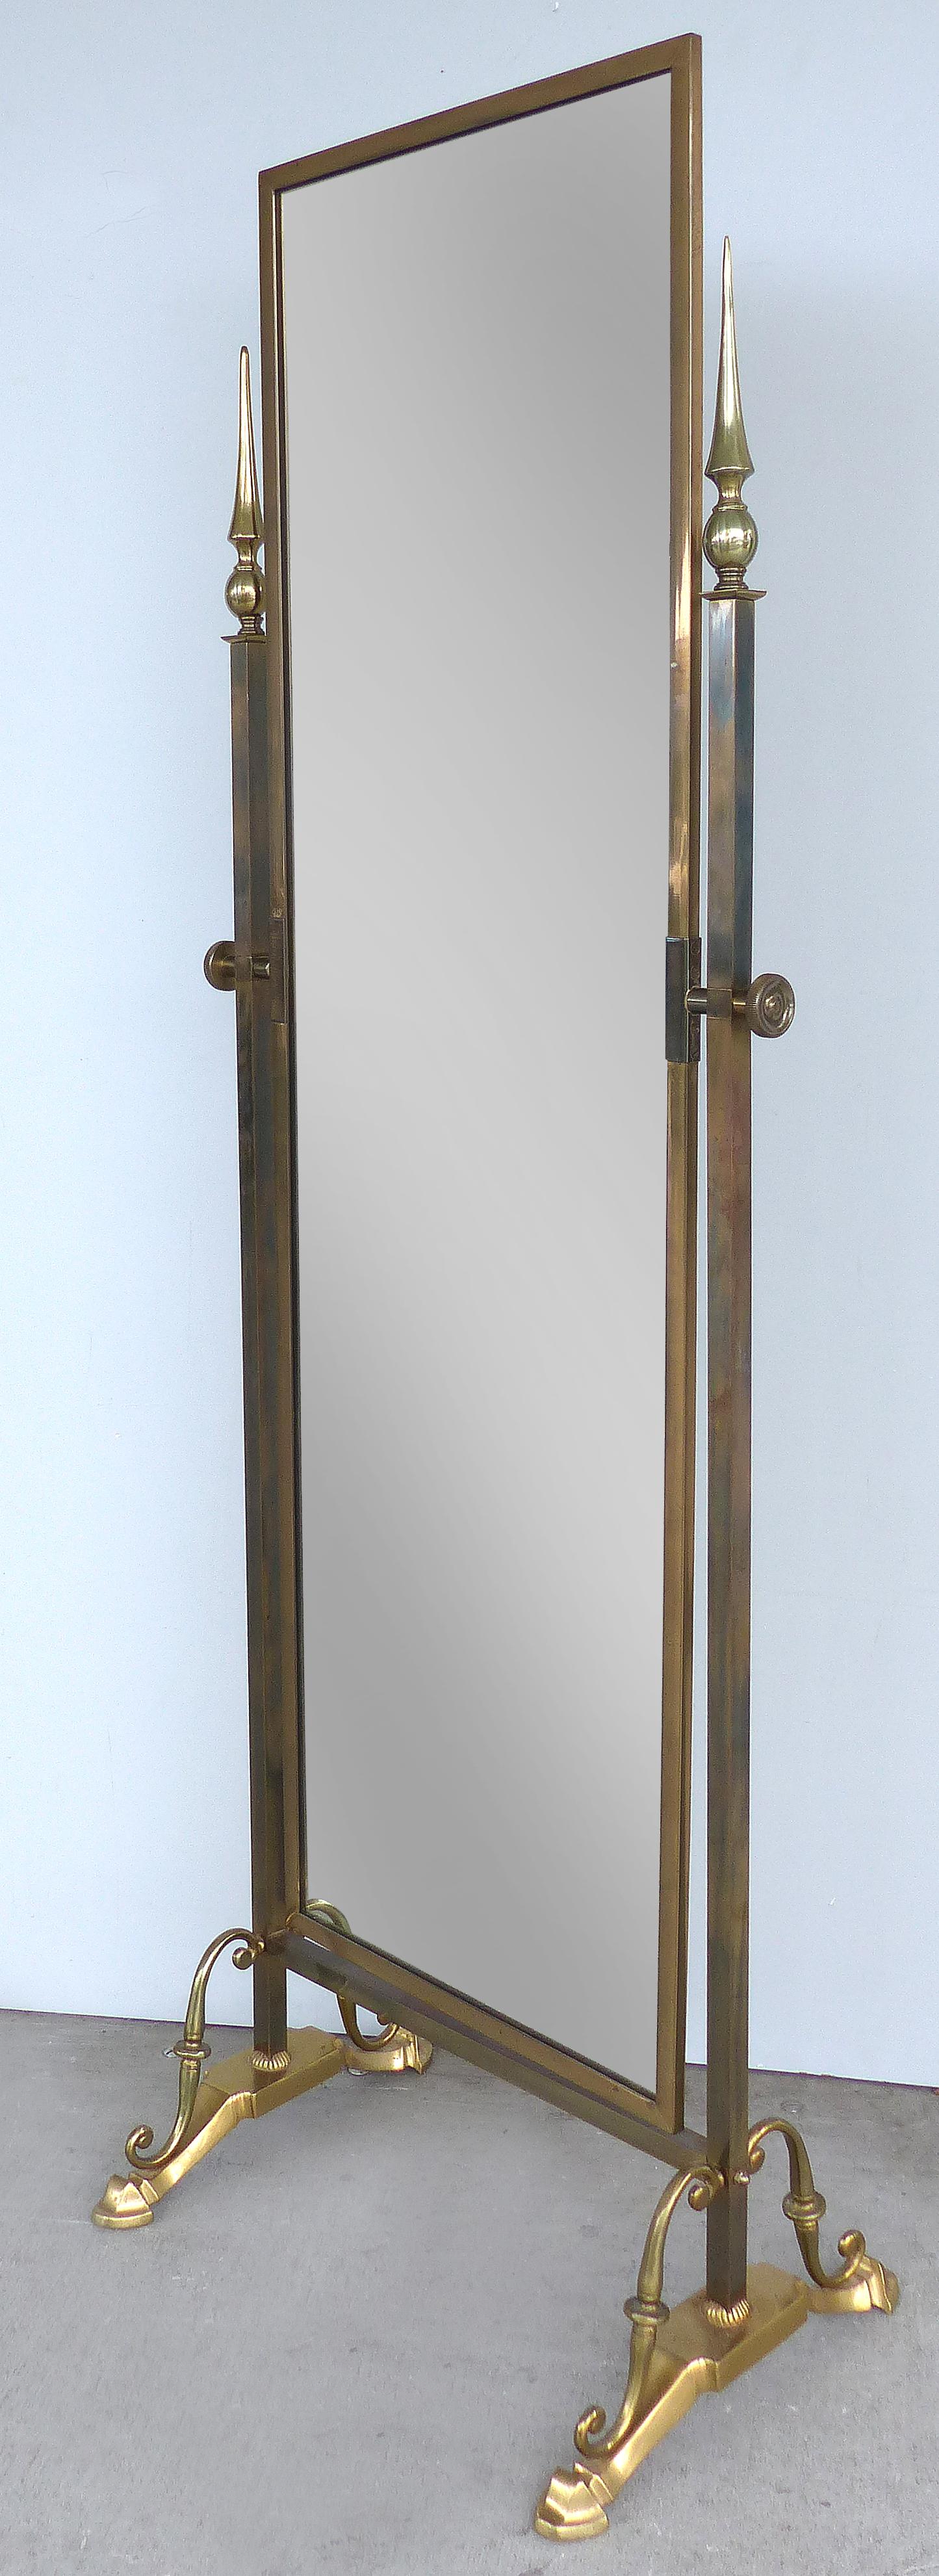 Offered for sale is an elegant solid brass cheval dressing mirror manufactured by Glo-Mar Artworks Inc. of New York. The mirror is in excellent condition and rotates as desired. The back is clad in ribbed brass.